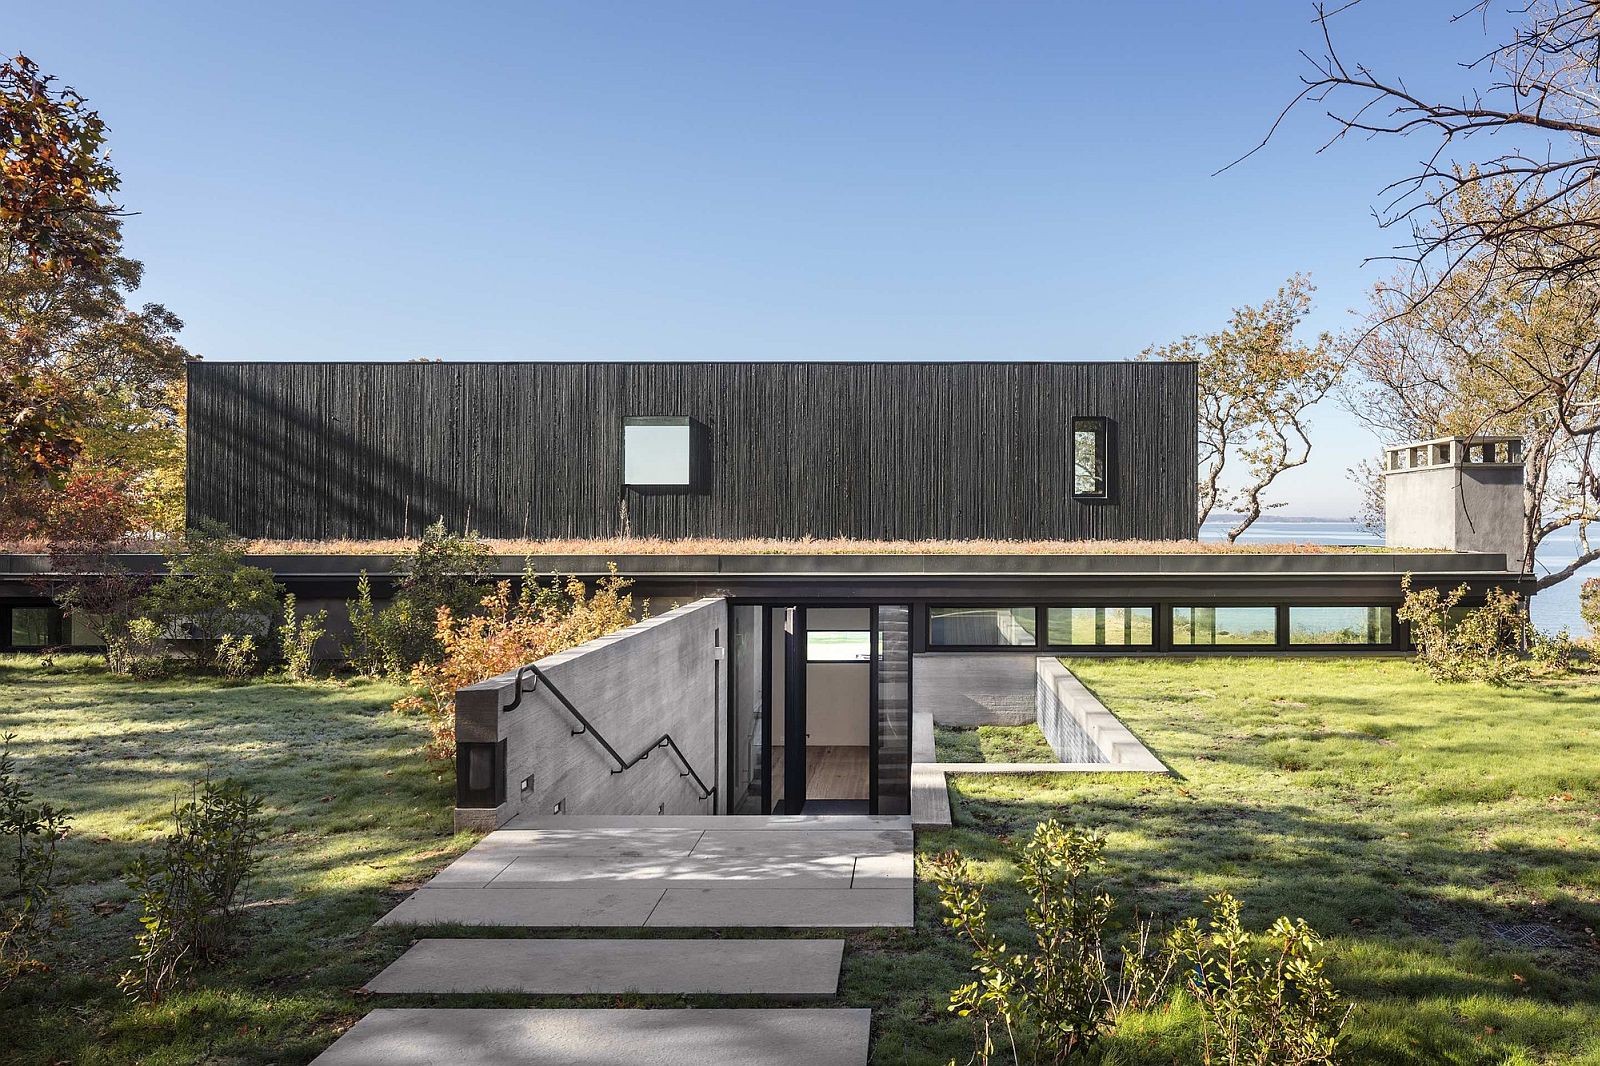 Cut in the earth creates aprivate entry to the house with Bay views